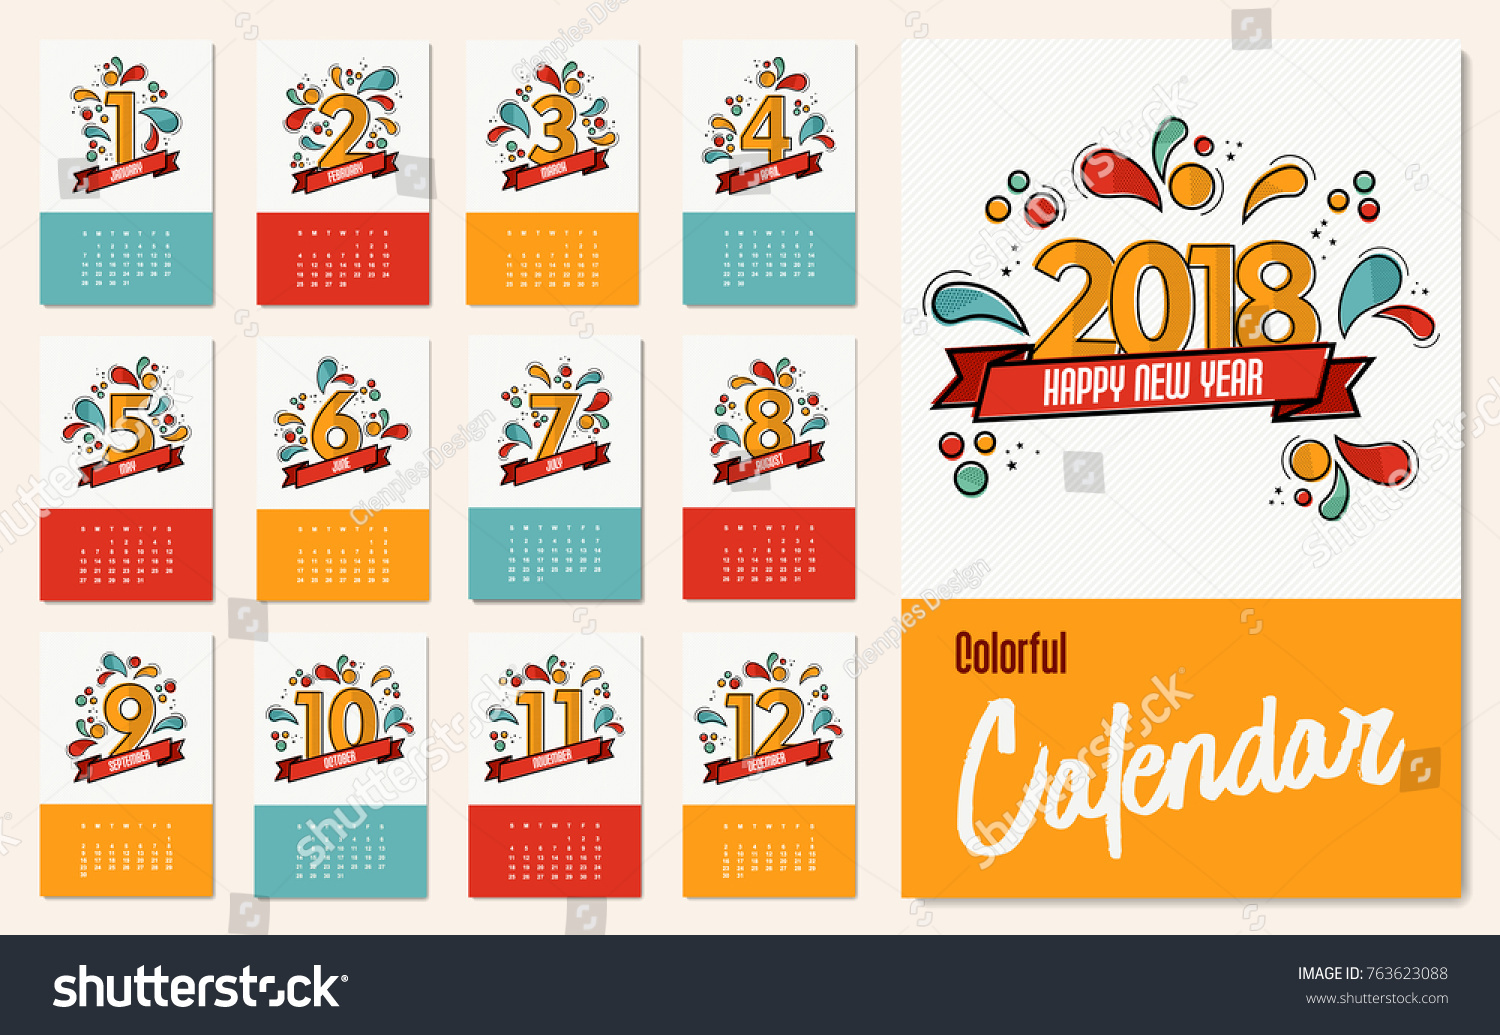 Monthly Event Calendar Template from image.shutterstock.com